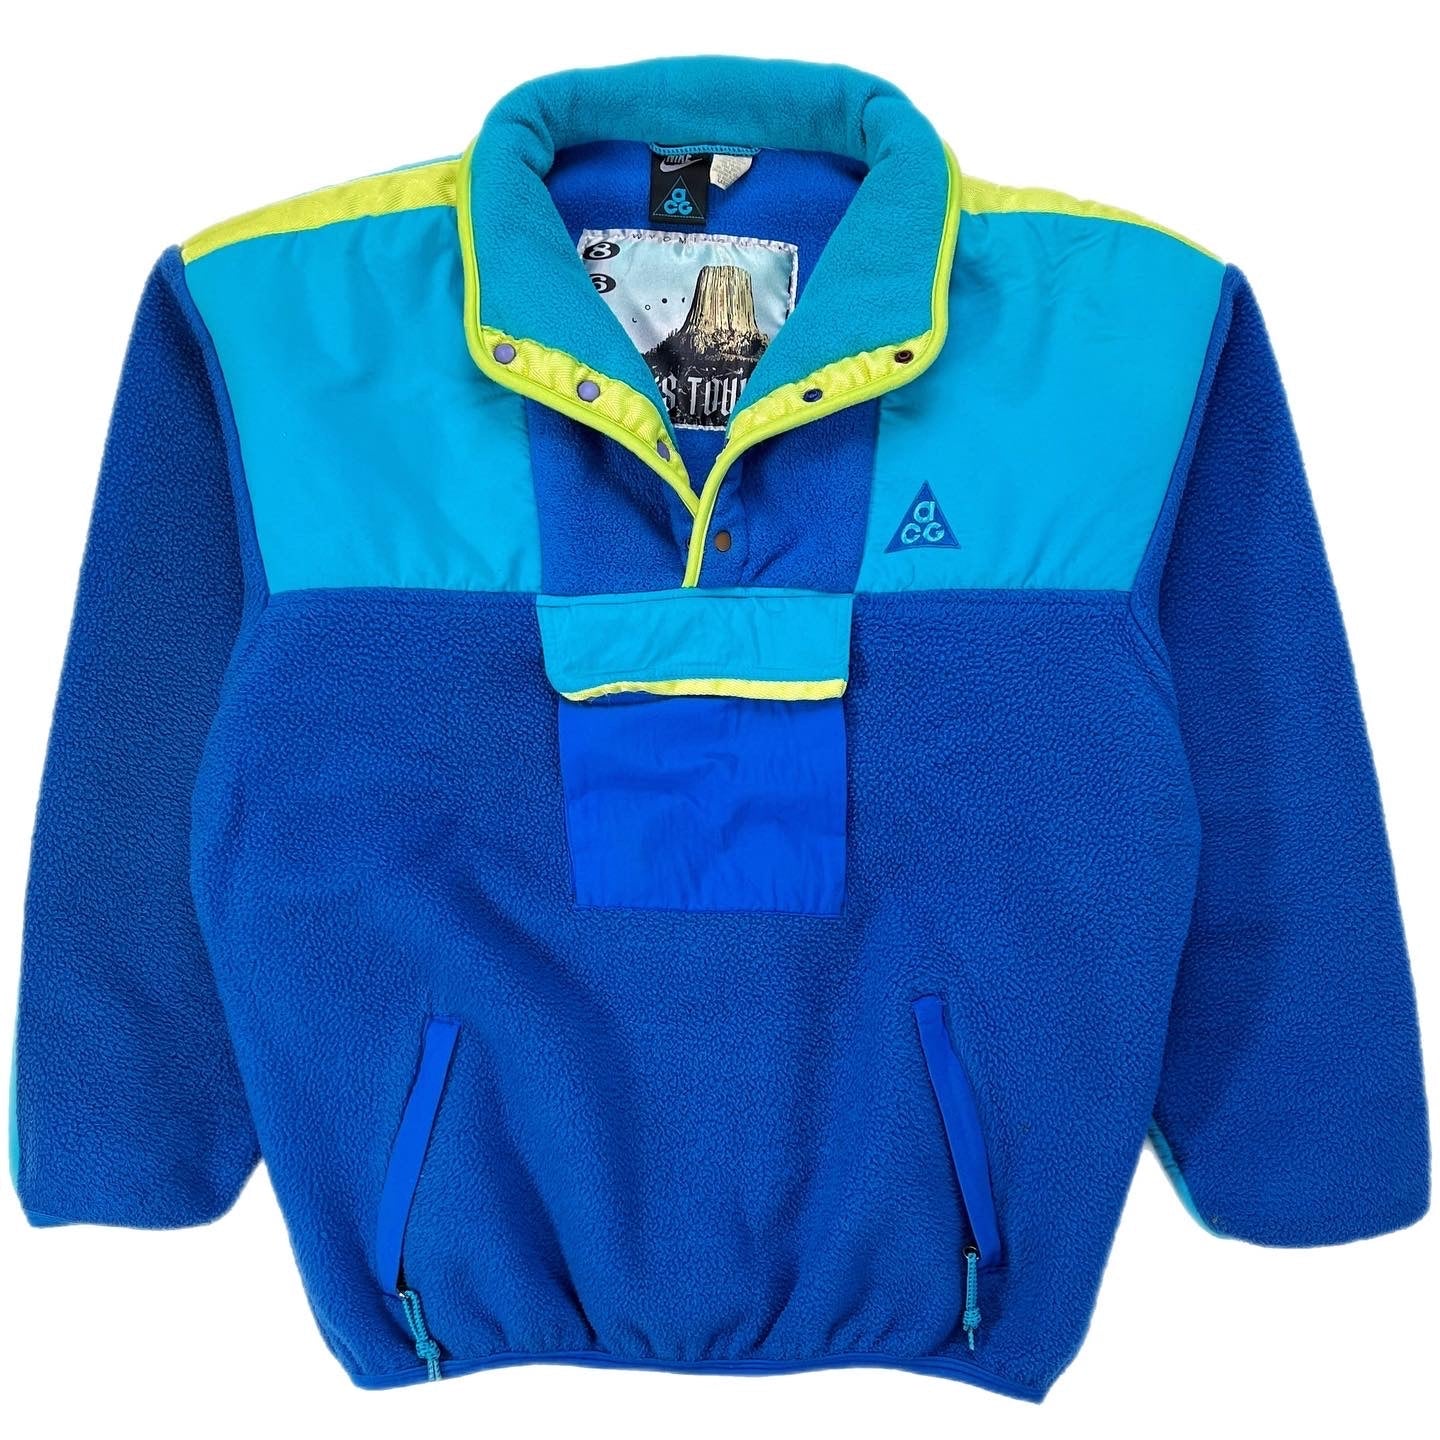 1980s Nike ACG Devils Tower Fleece Pullover, Electric Blue (L)